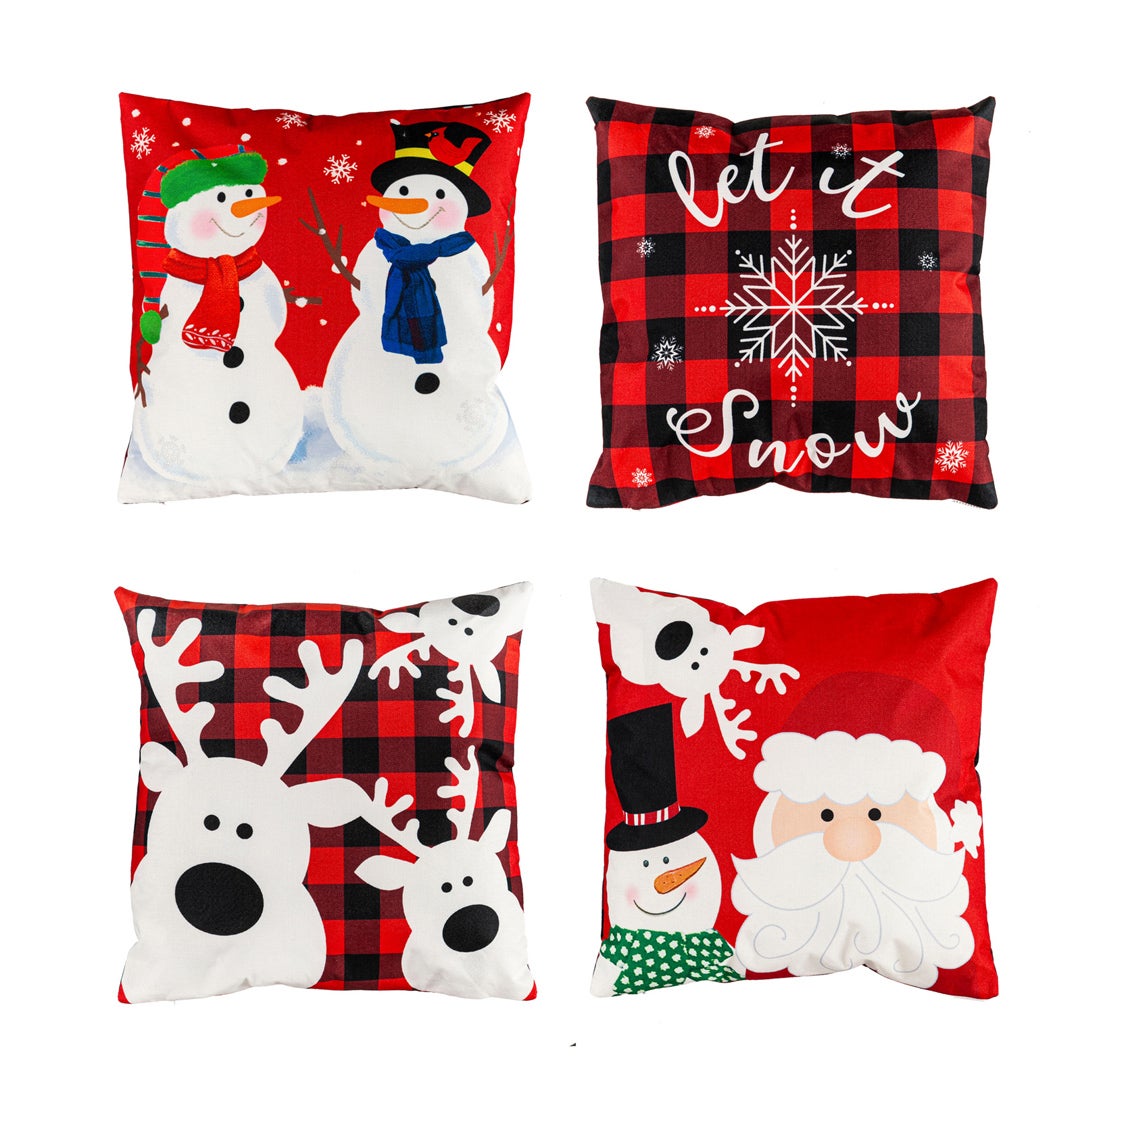 Let it Snow Throw Pillow Covers Set of 4